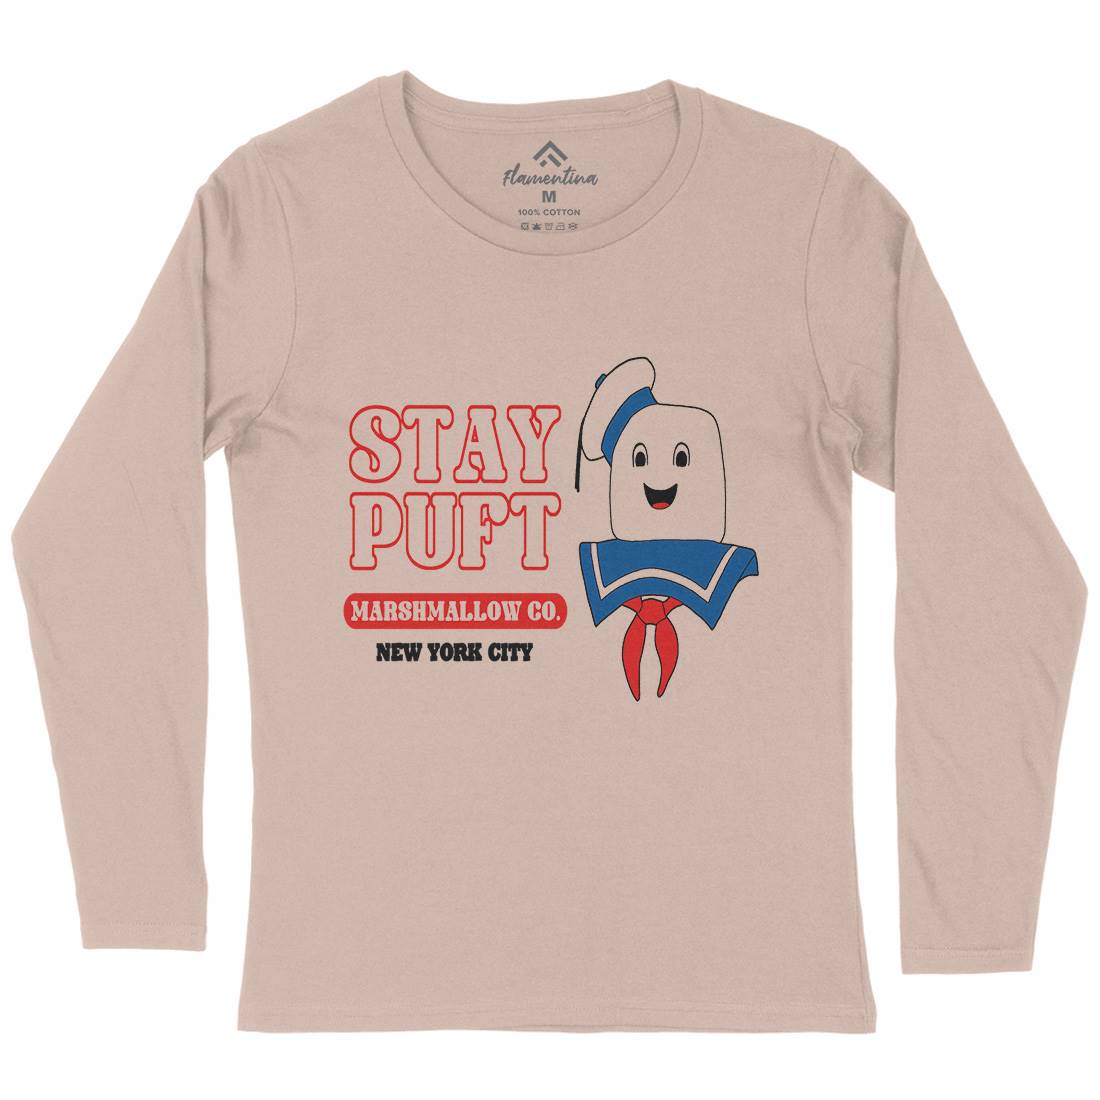 Stay Puft Co Womens Long Sleeve T-Shirt Space D141